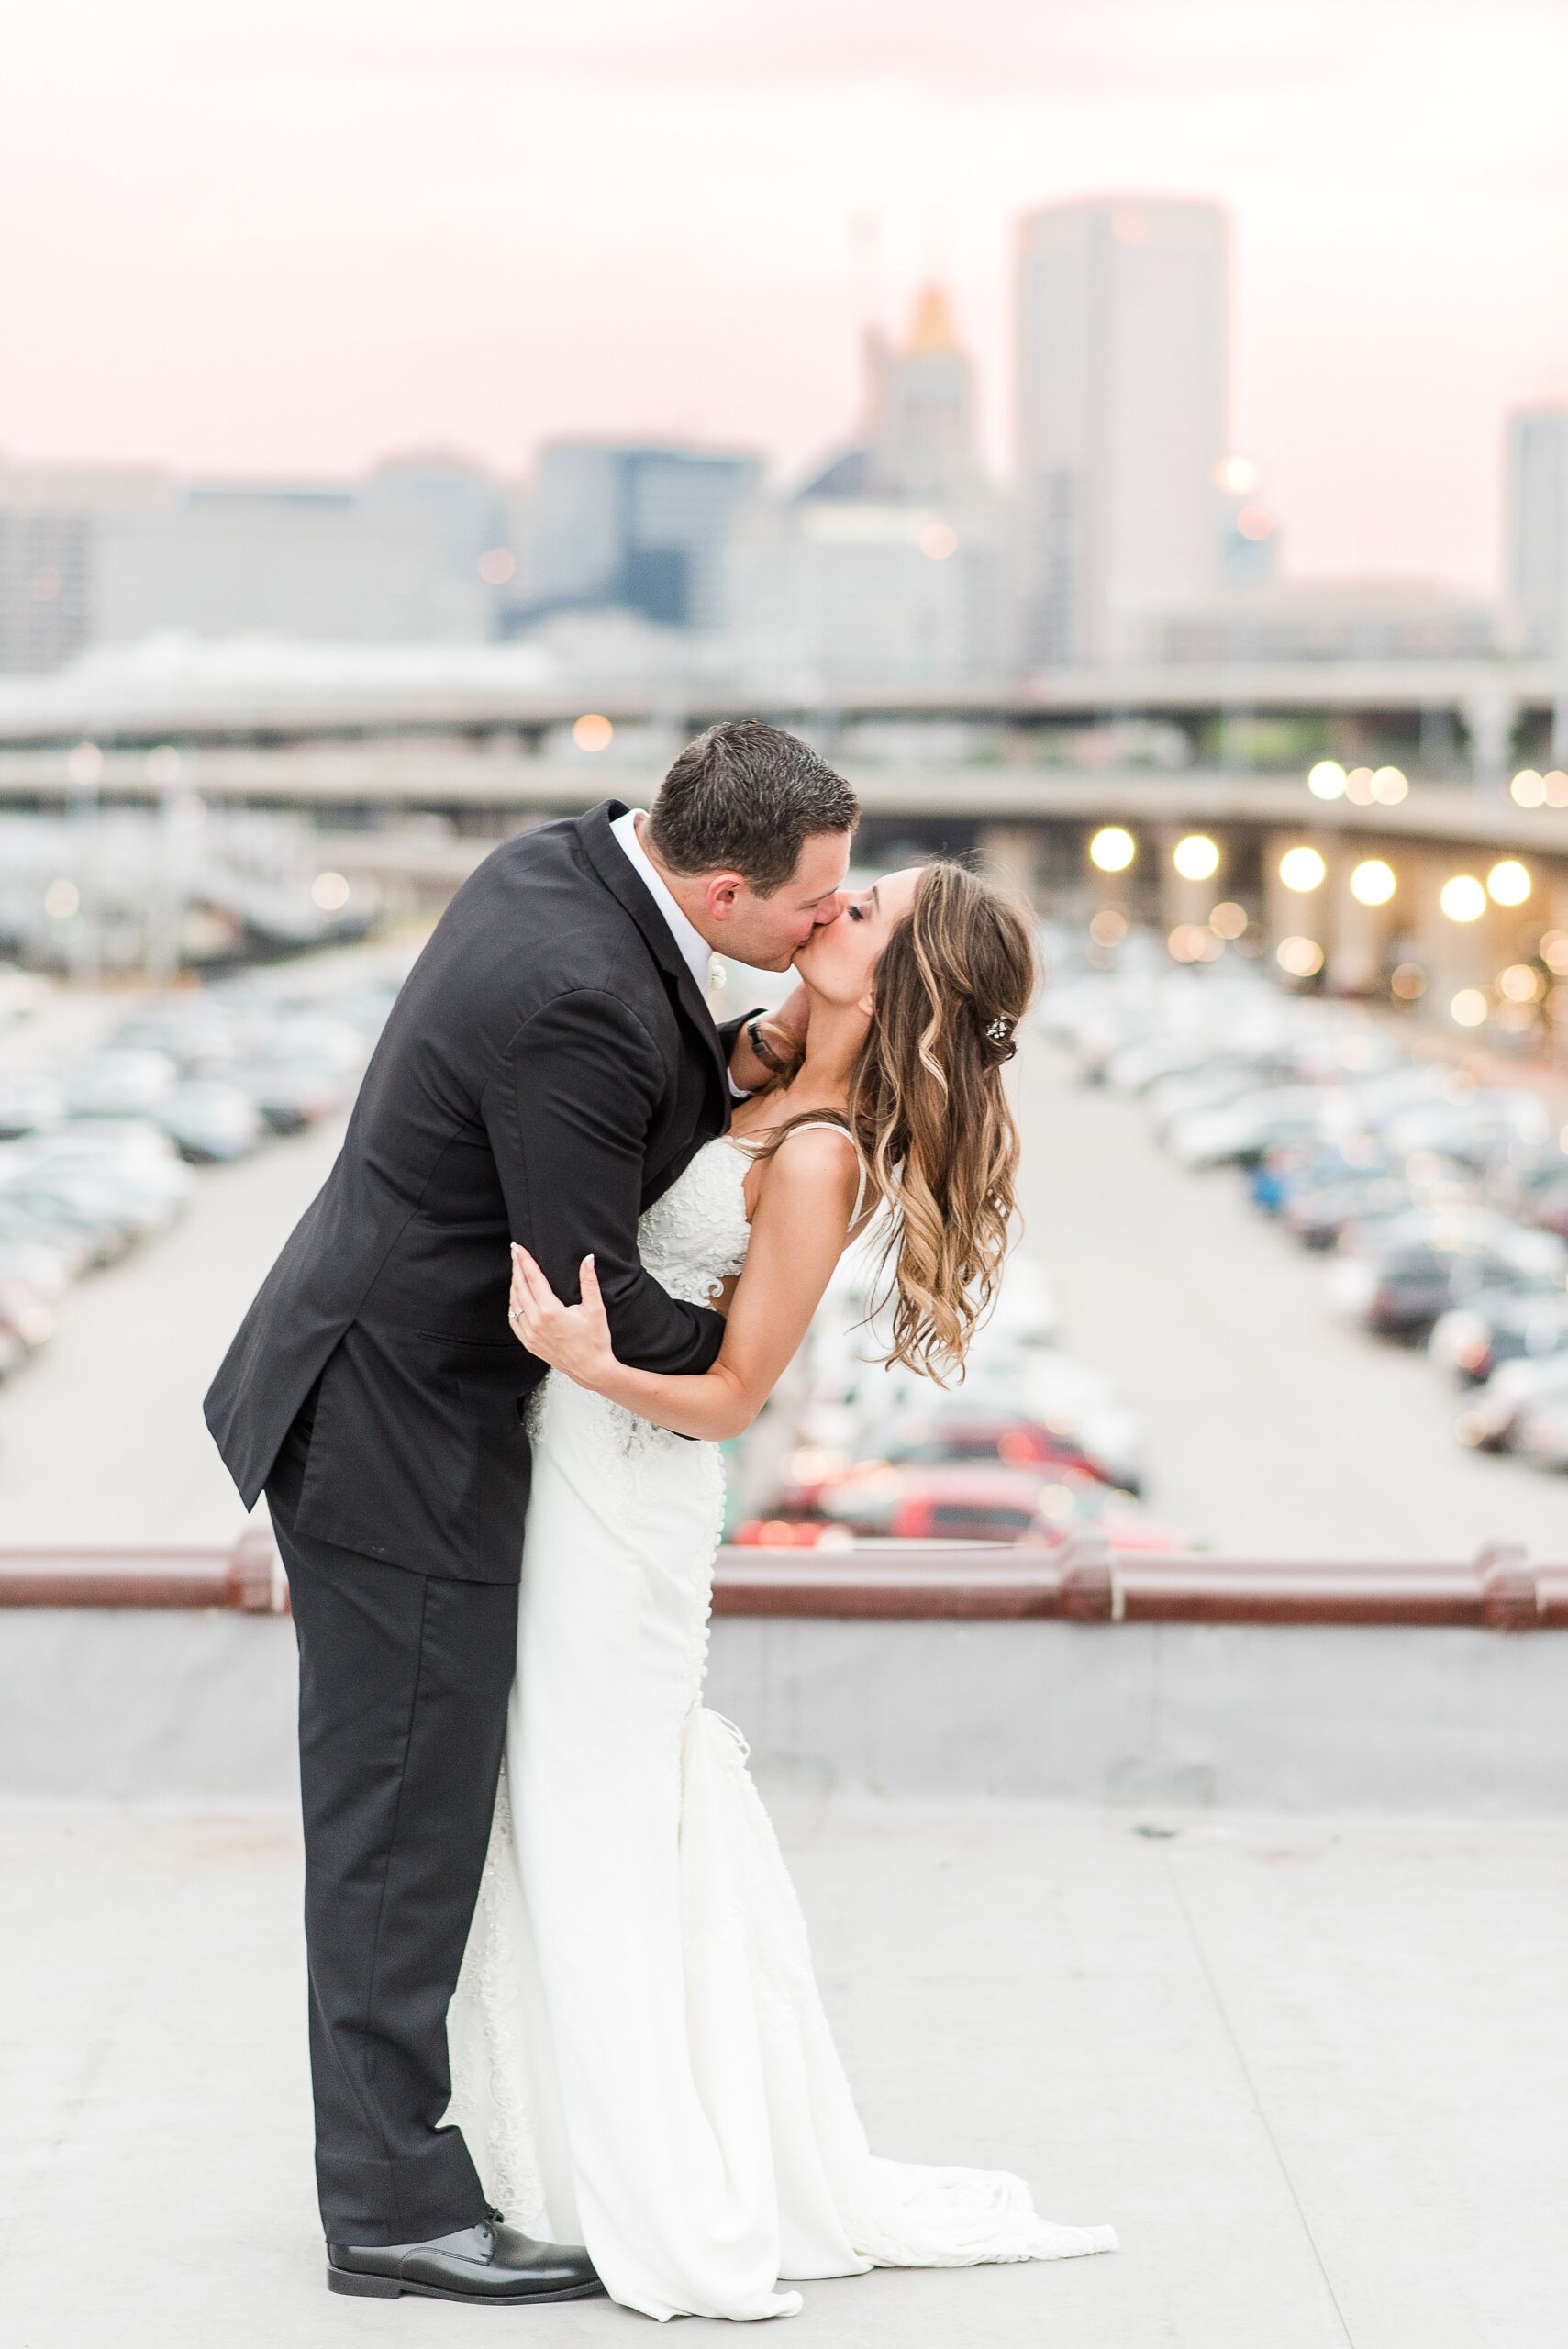 Newlyweds kiss and dip while standing on a rooftop at sunset